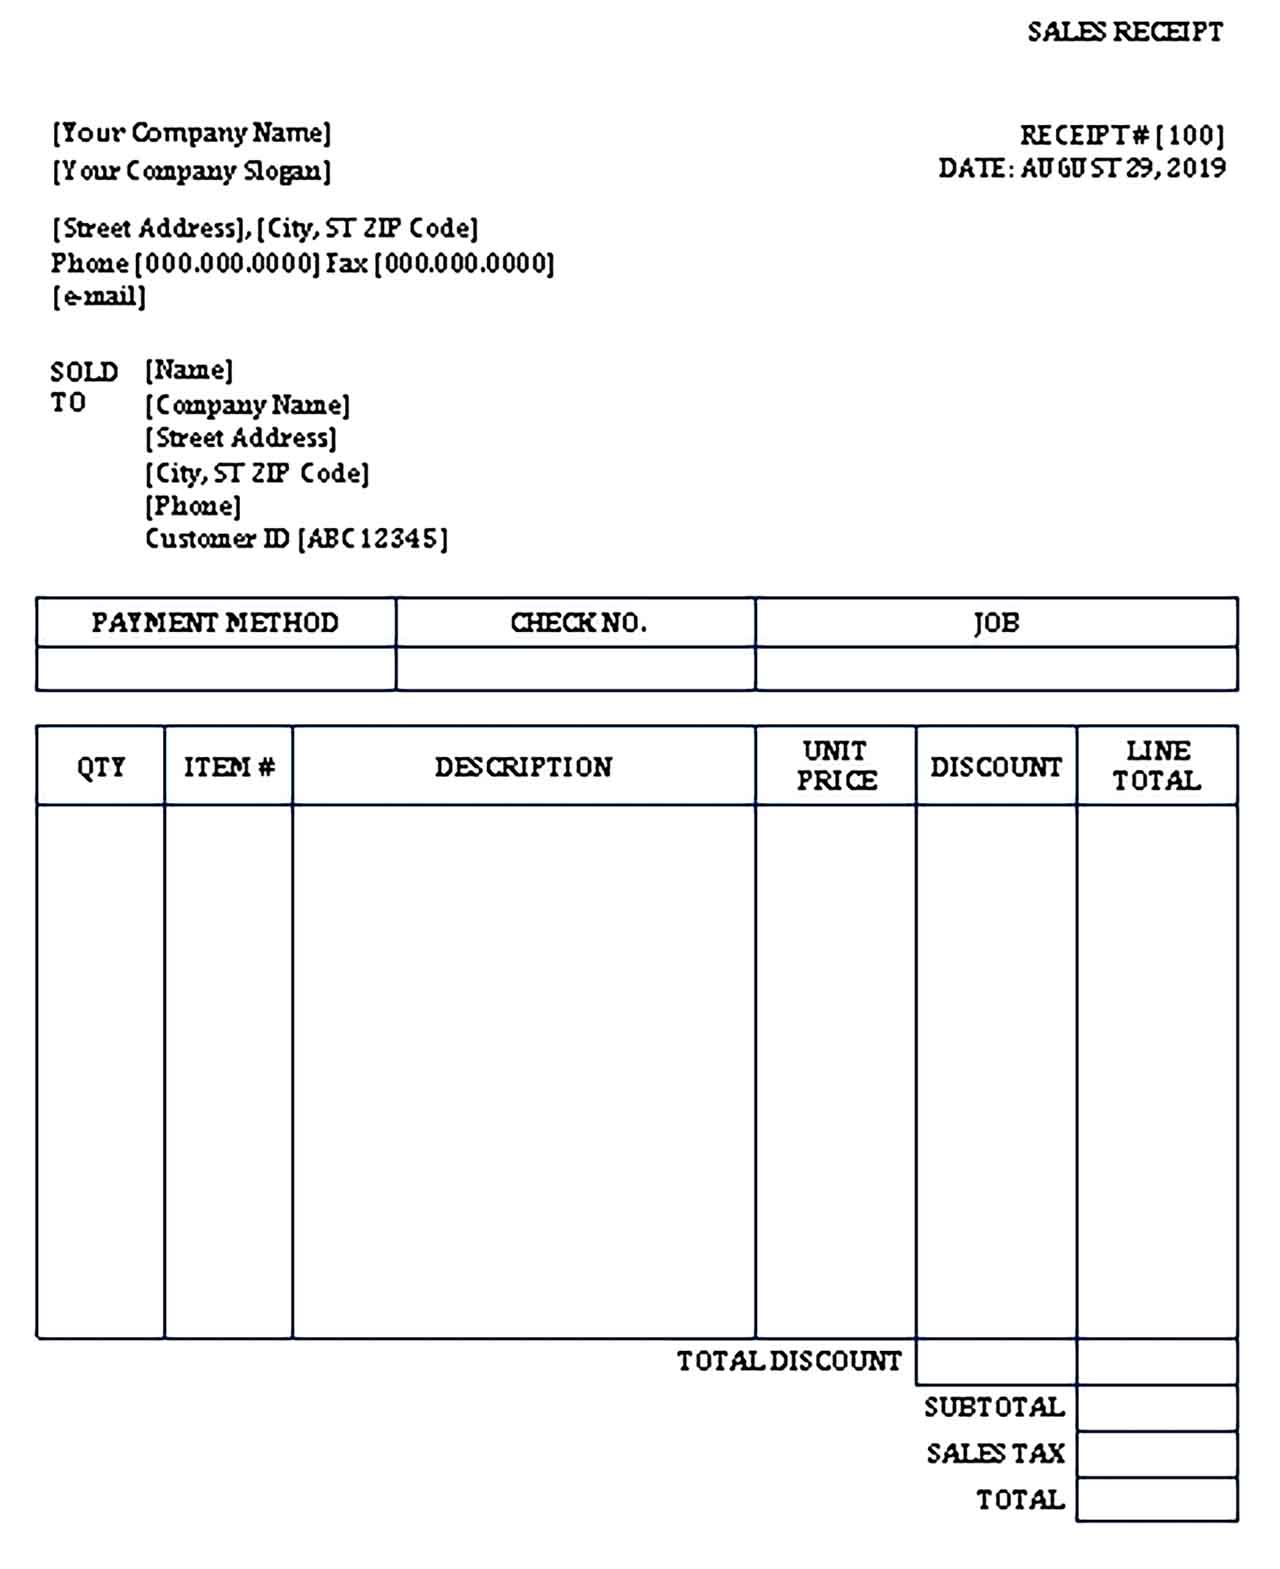 Sample Sales Receipt in Word Templates